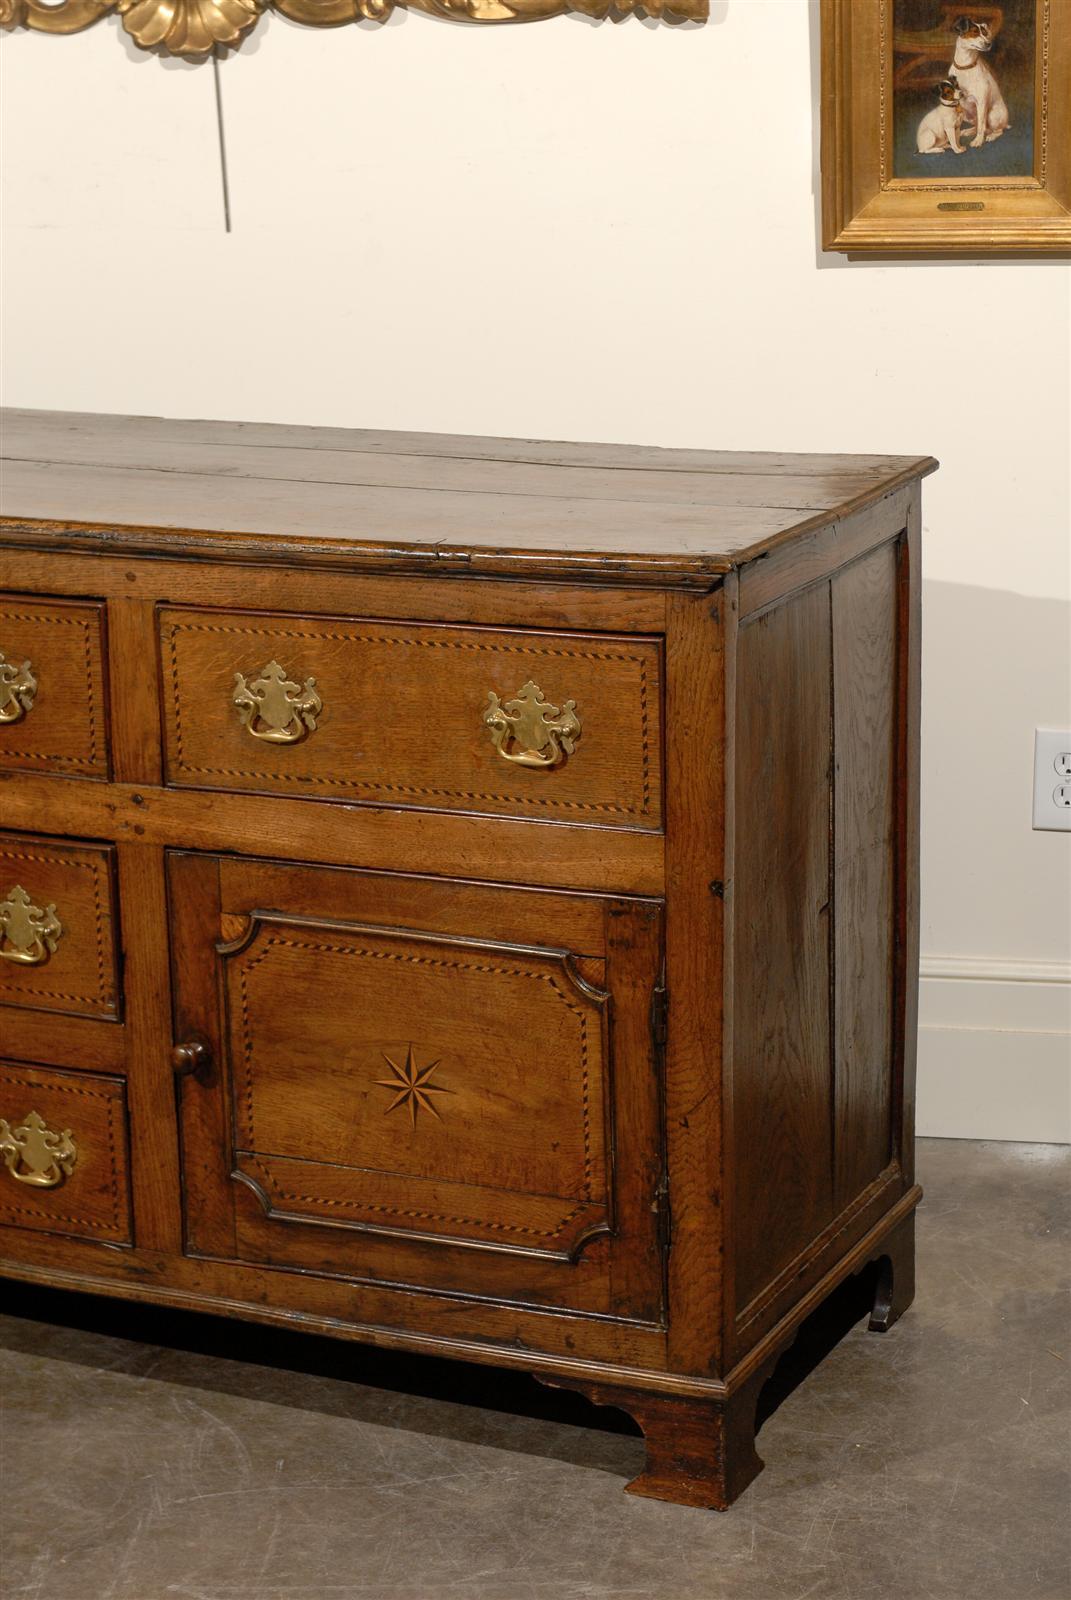 1780s English George III Period Oak Server with Inlaid Decor, Doors and Drawers 2